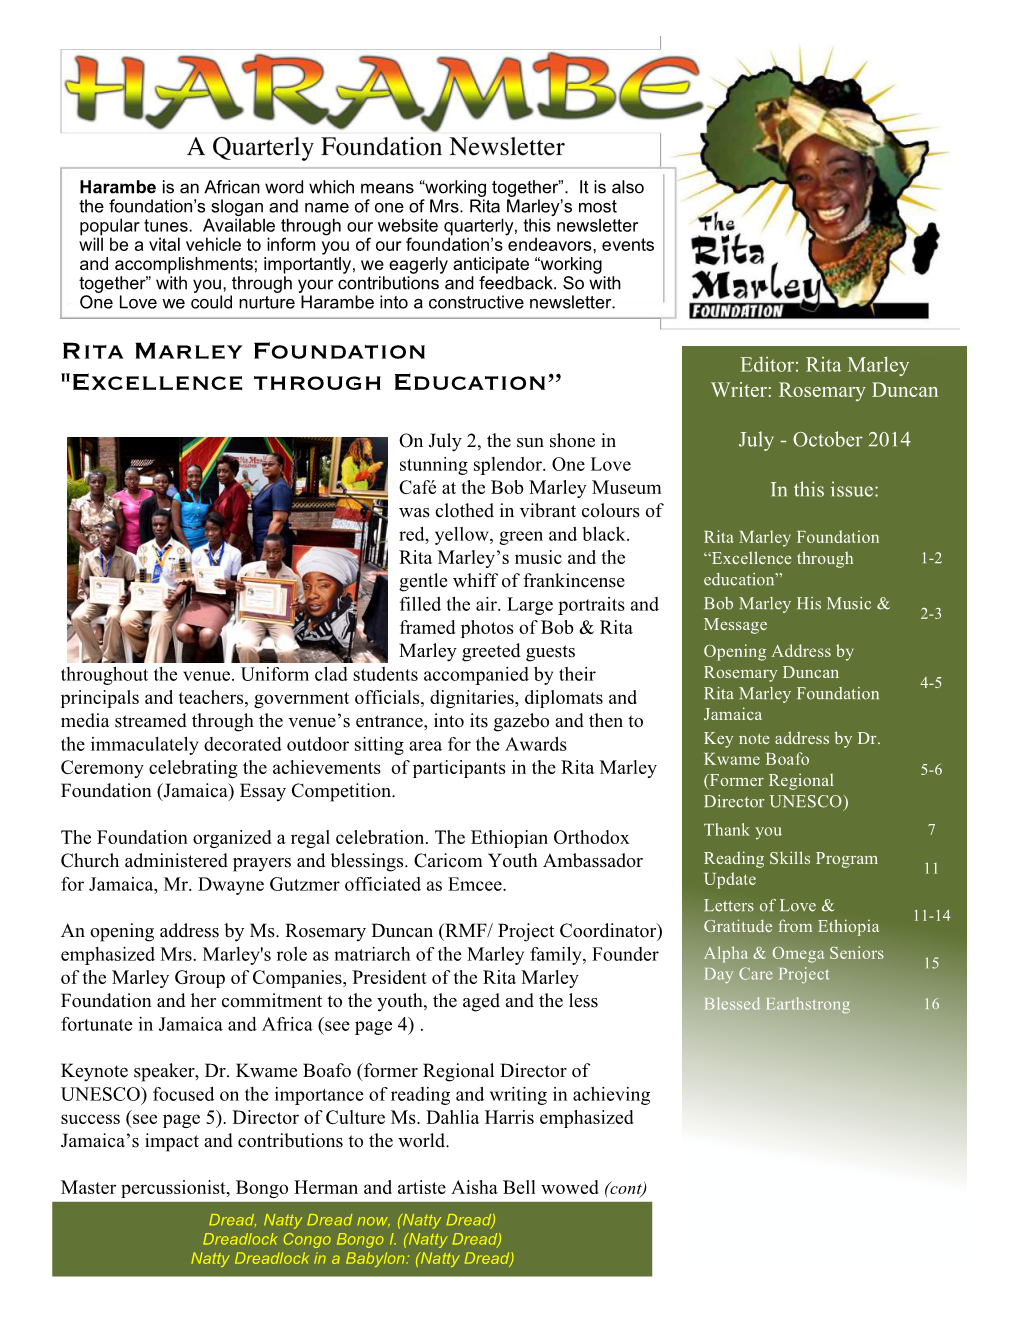 Rita Marley Foundation "Excellence Through Education”July 2014